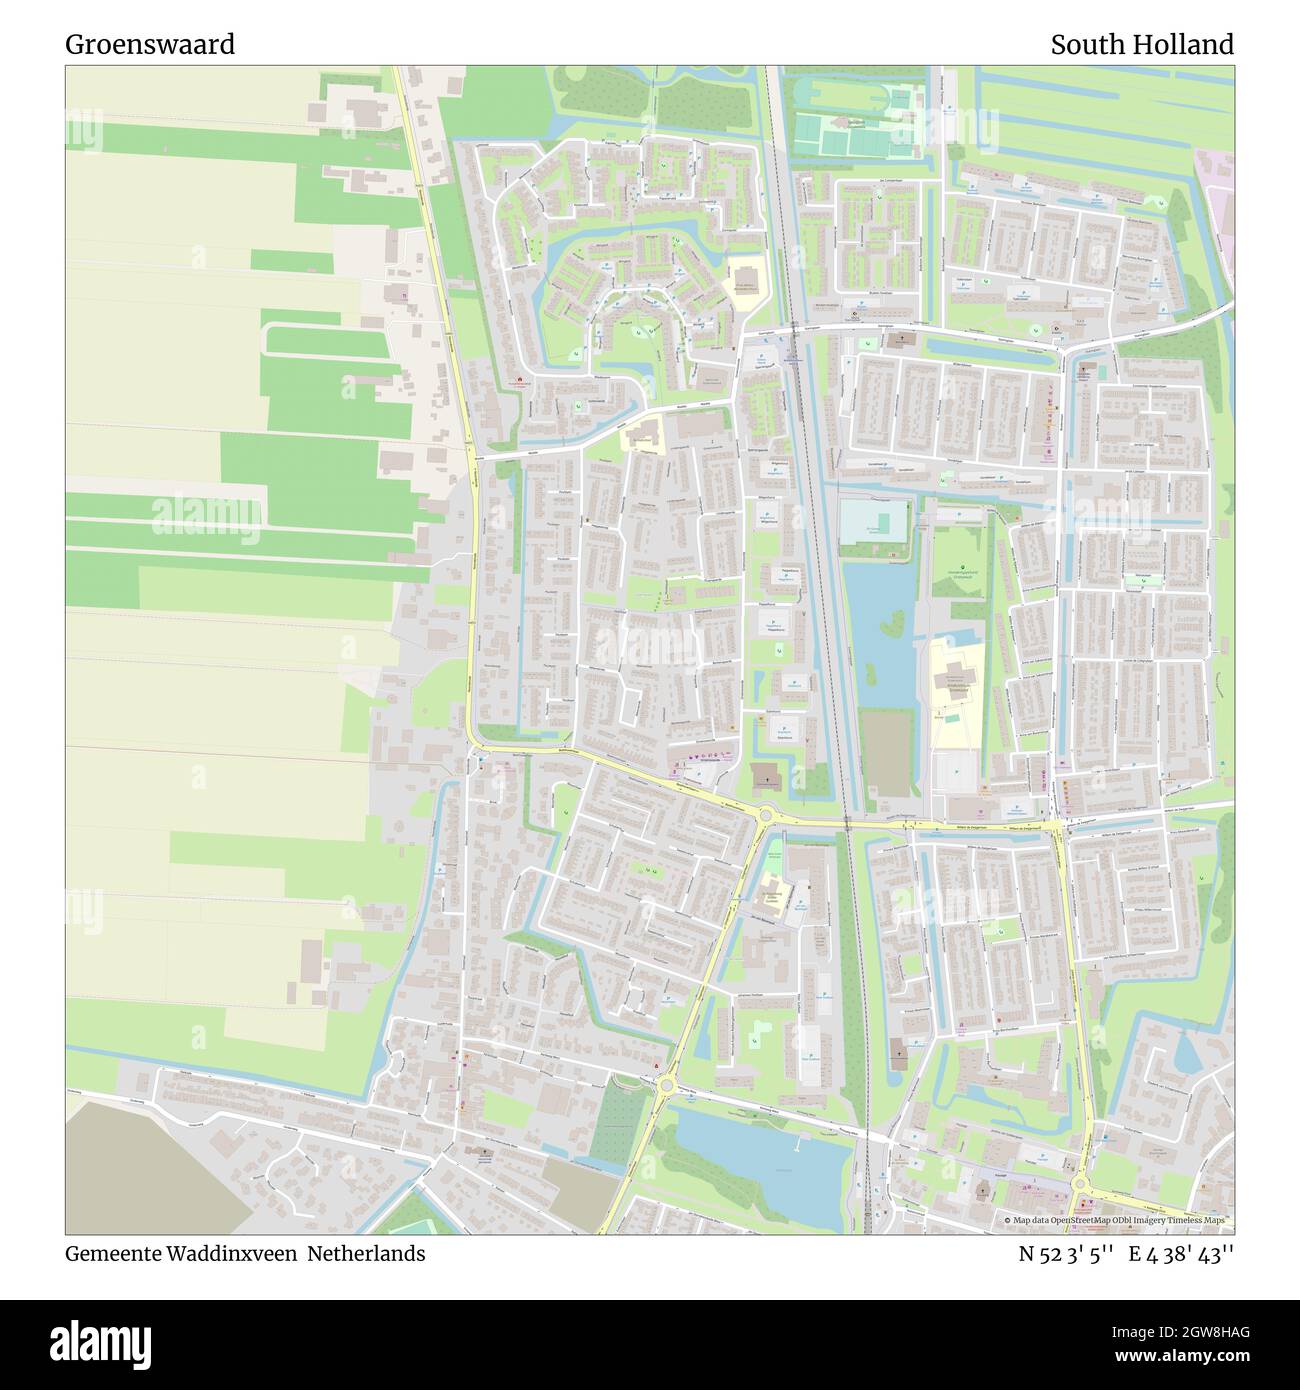 Groenswaard, Gemeente Waddinxveen, Netherlands, South Holland, N 52 3' 5'', E 4 38' 43'', map, Timeless Map published in 2021. Travelers, explorers and adventurers like Florence Nightingale, David Livingstone, Ernest Shackleton, Lewis and Clark and Sherlock Holmes relied on maps to plan travels to the world's most remote corners, Timeless Maps is mapping most locations on the globe, showing the achievement of great dreams Stock Photo